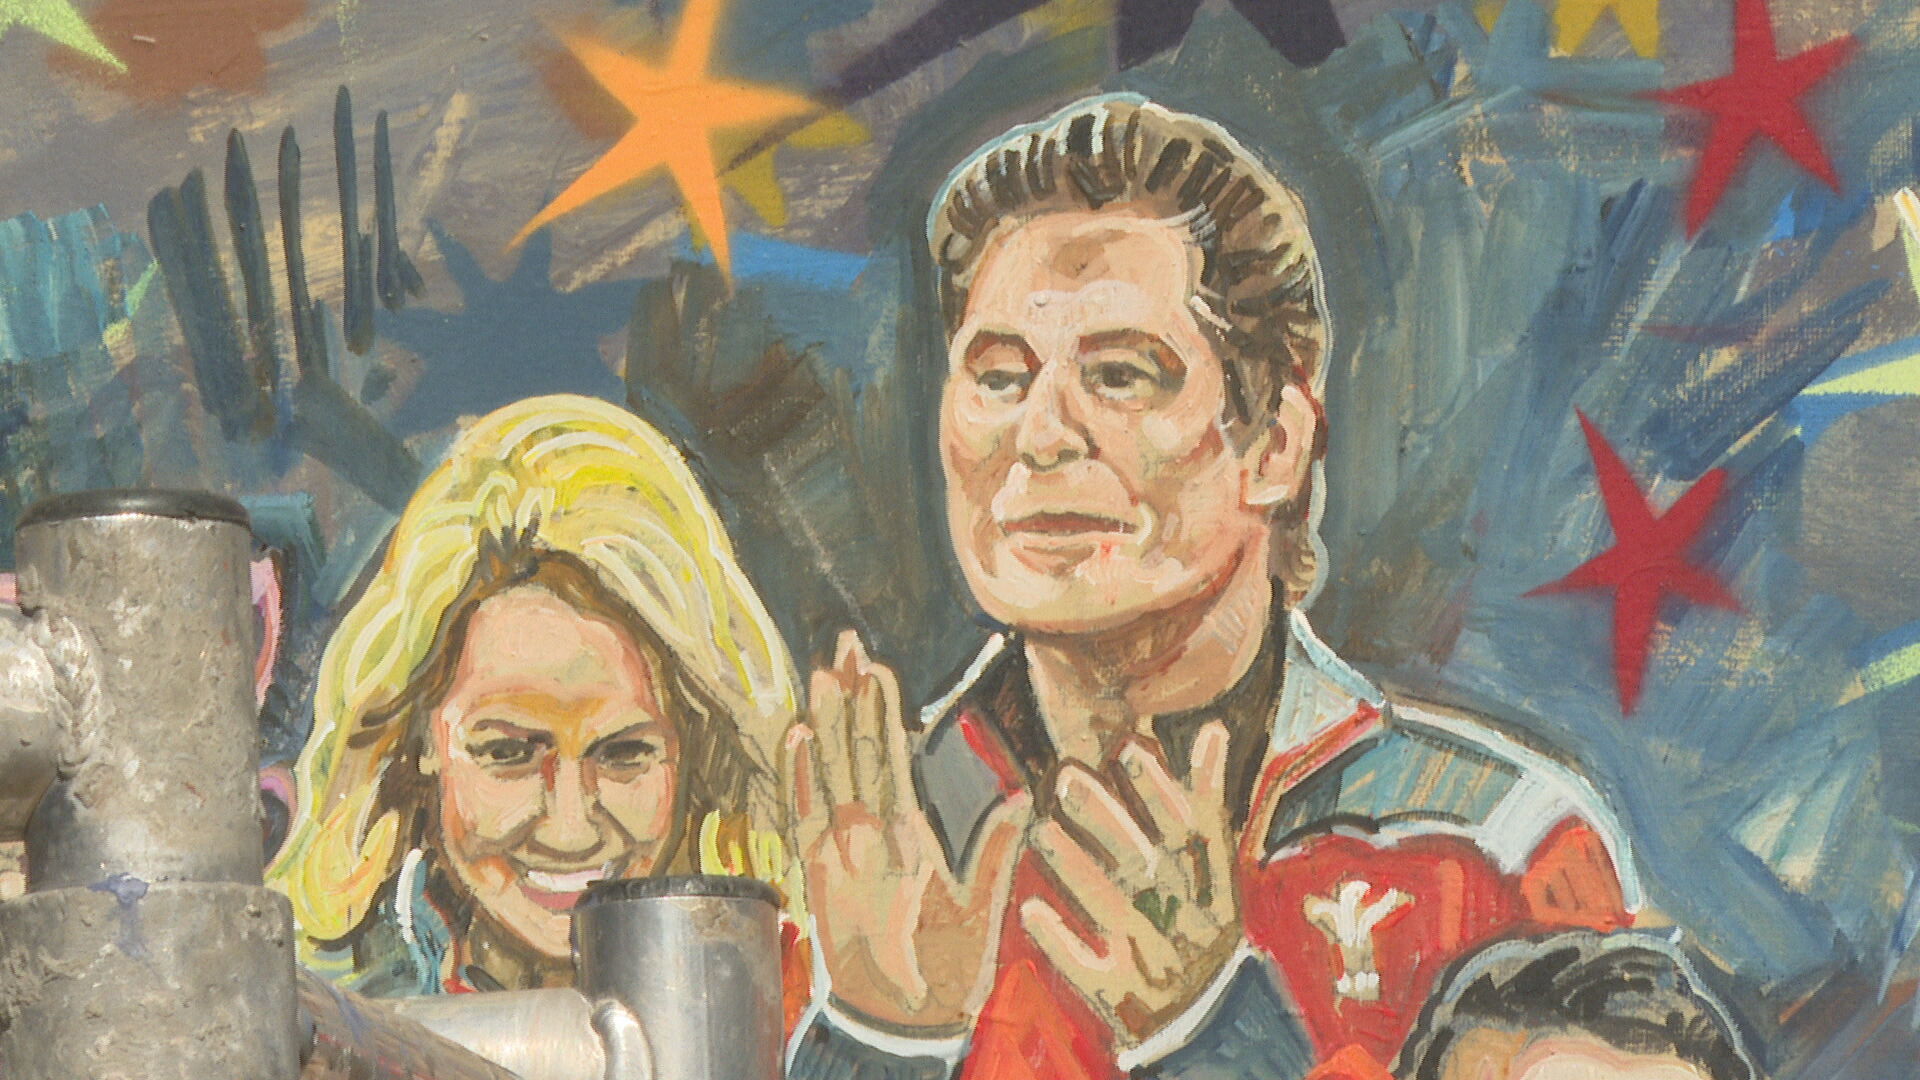 The mural features prominent and well-loved faces in media, like David Hasselhoff and Lorraine Kelly. 